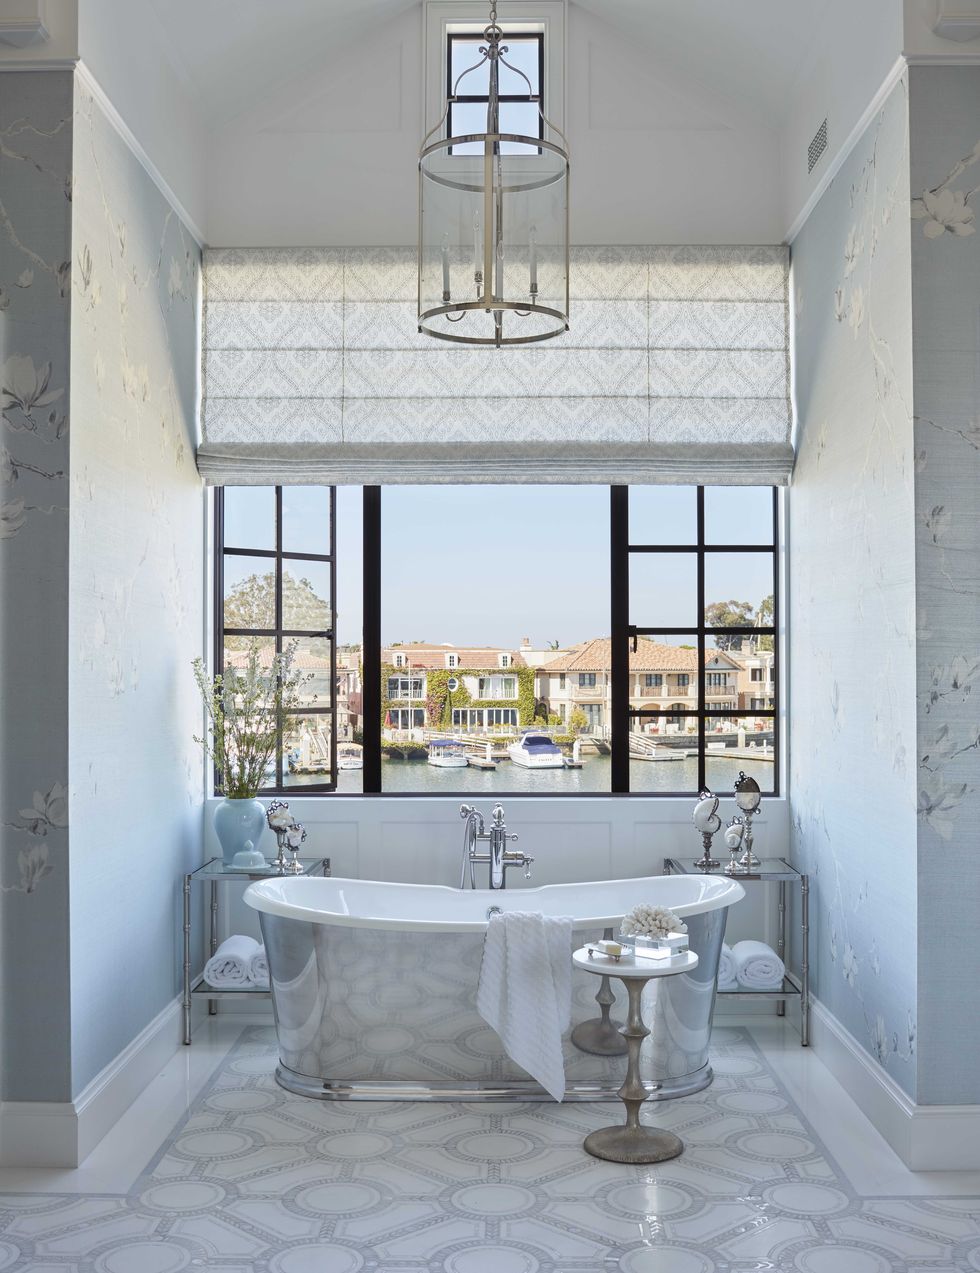 main bathroom, with silver bath tub overlooking views of water, blue wallpaper